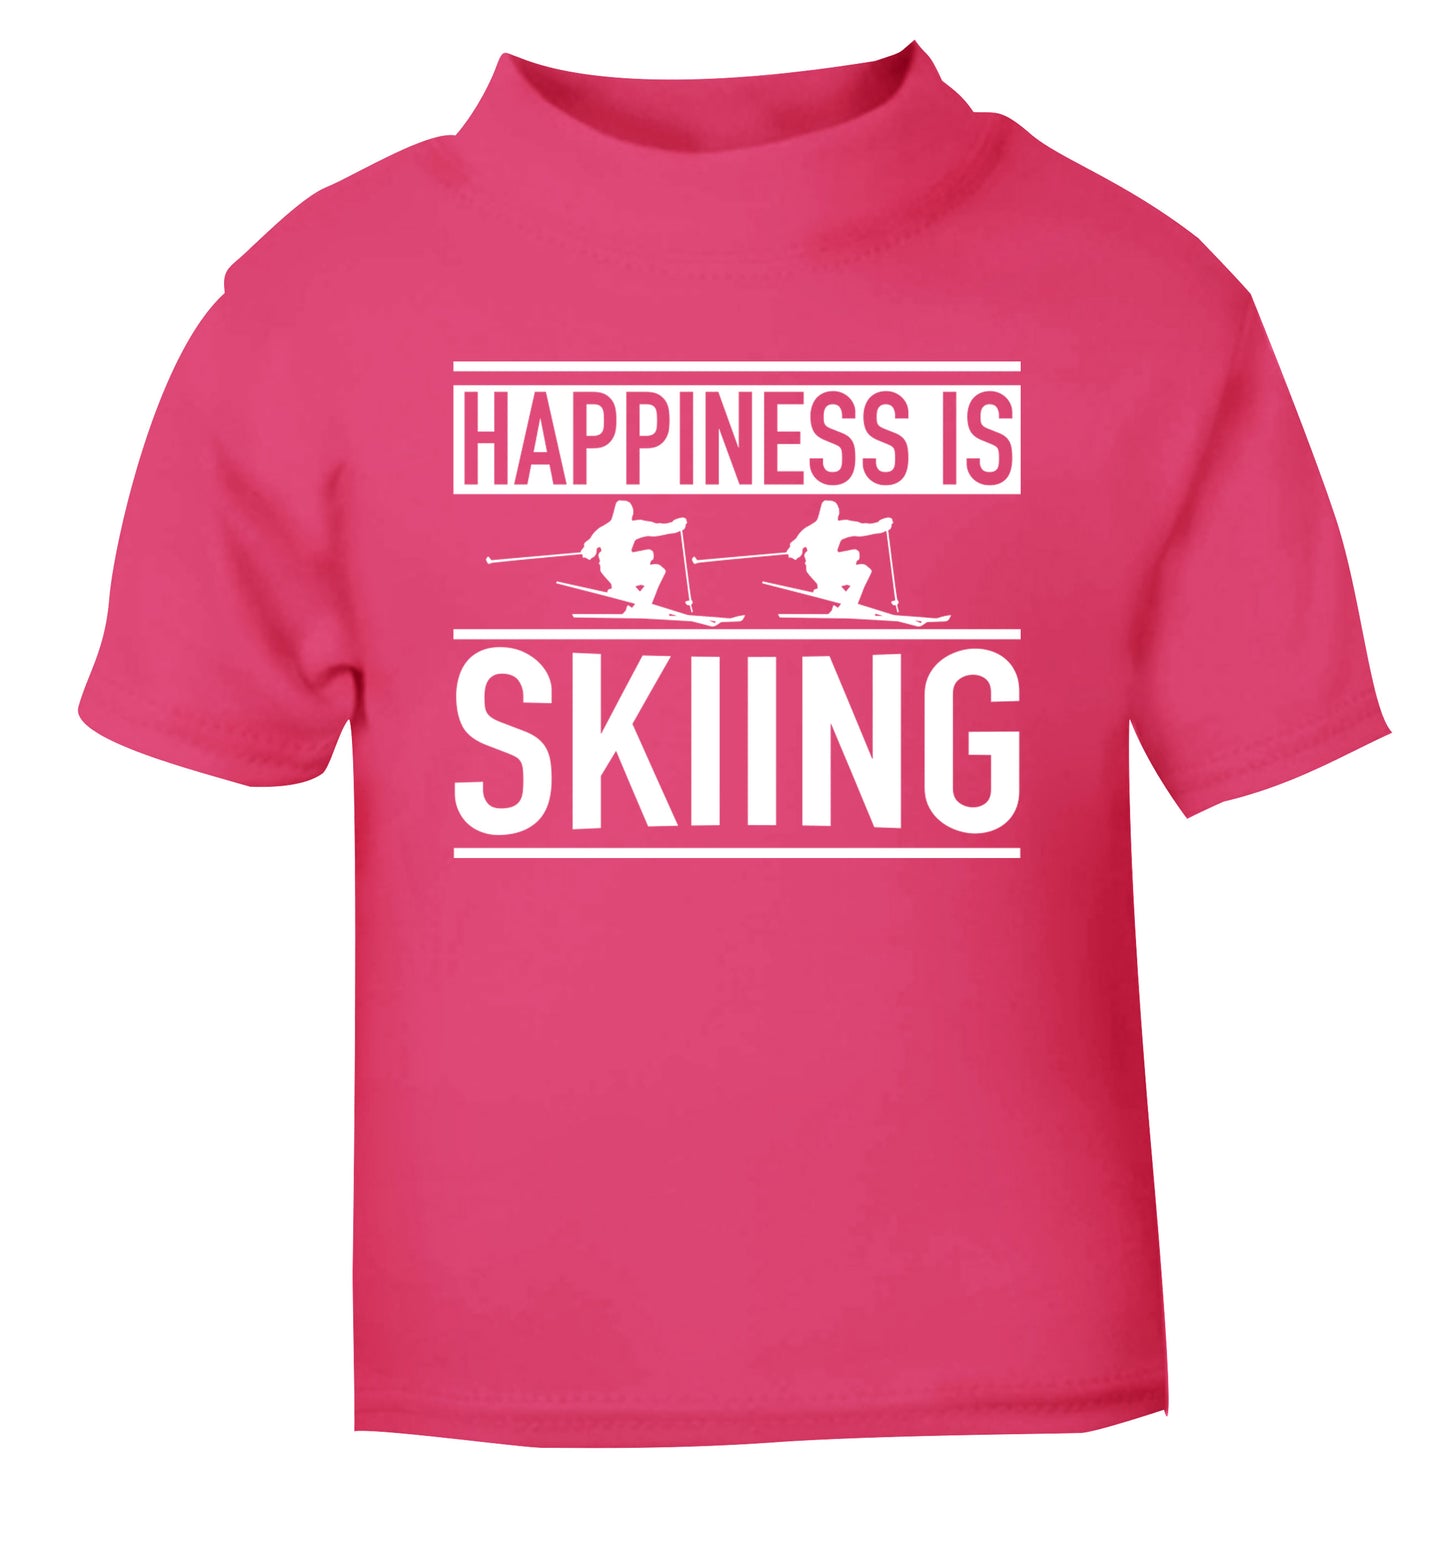 Happiness is skiing pink Baby Toddler Tshirt 2 Years